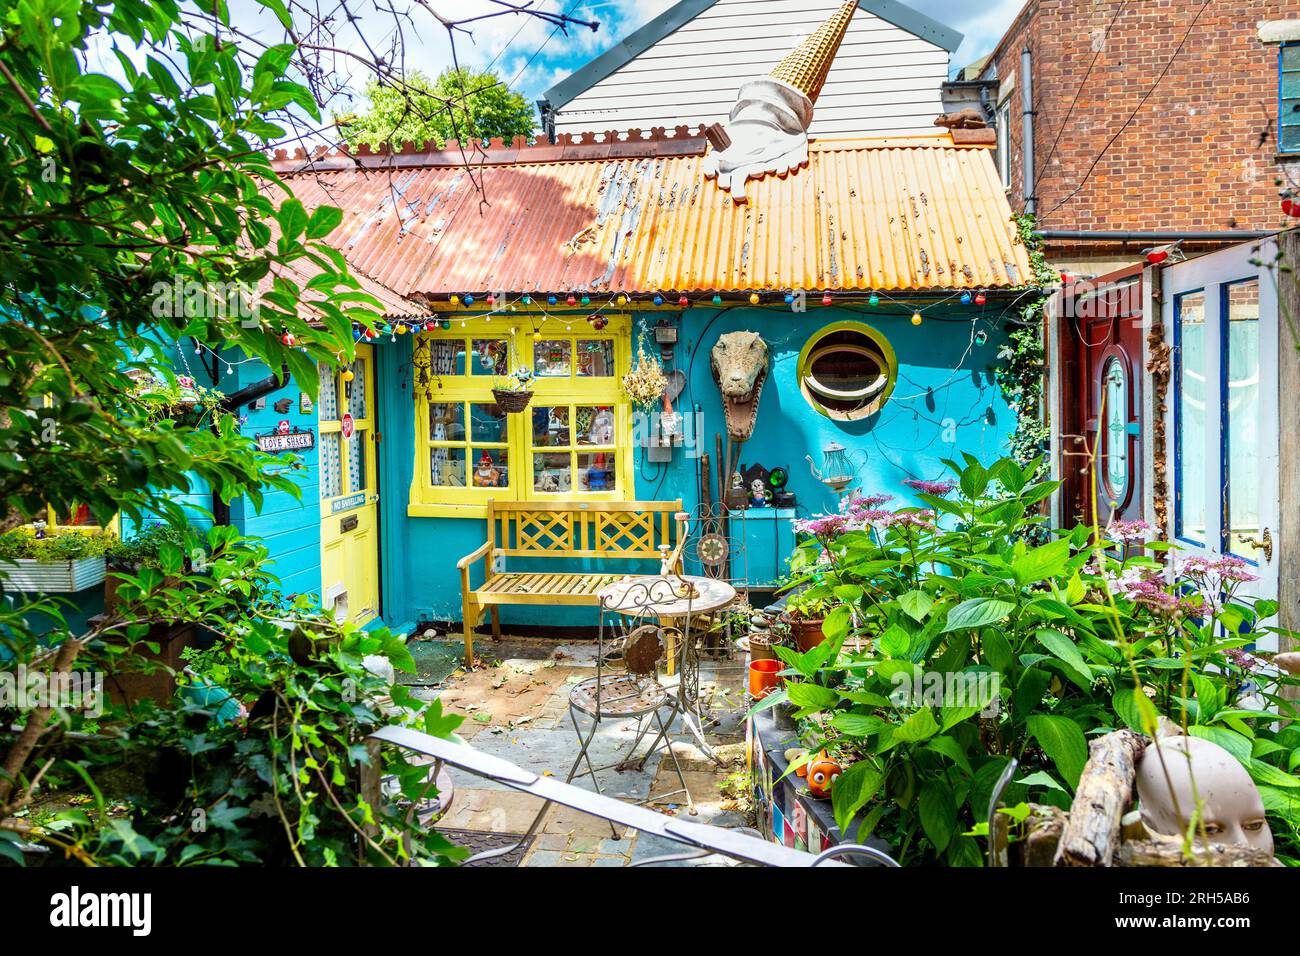 Exterior of a colourful, decorated house with garden on Eel Pie Island artist community in Twickenham, London, UK Stock Photo